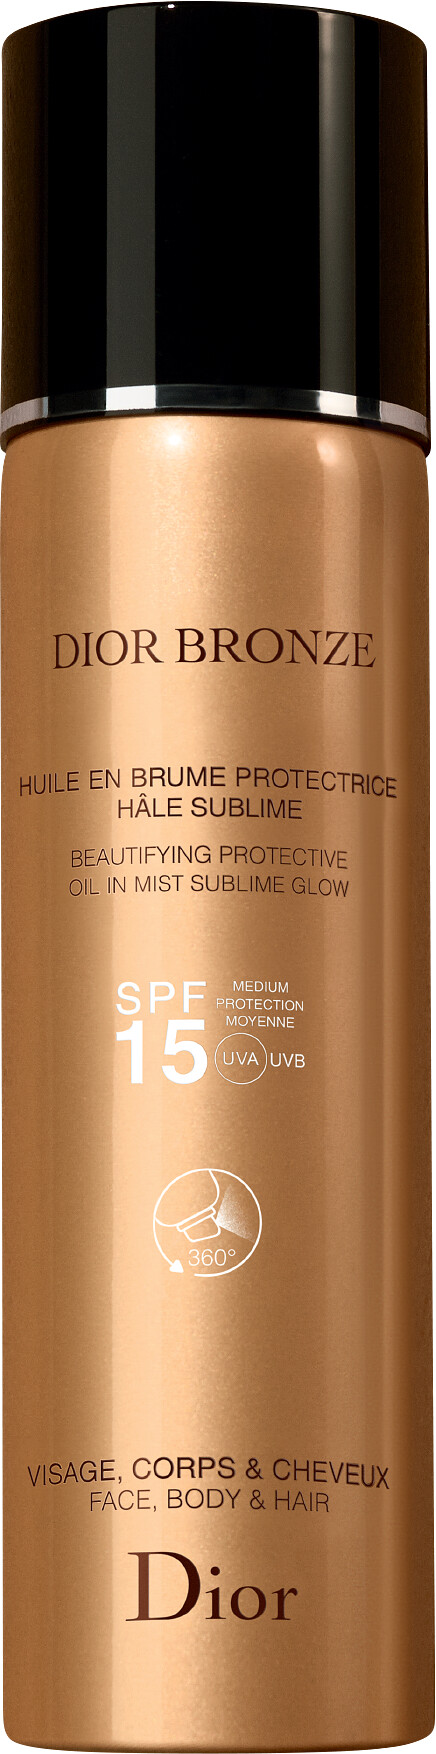 DIOR Bronze Beautifying Protective Oil 